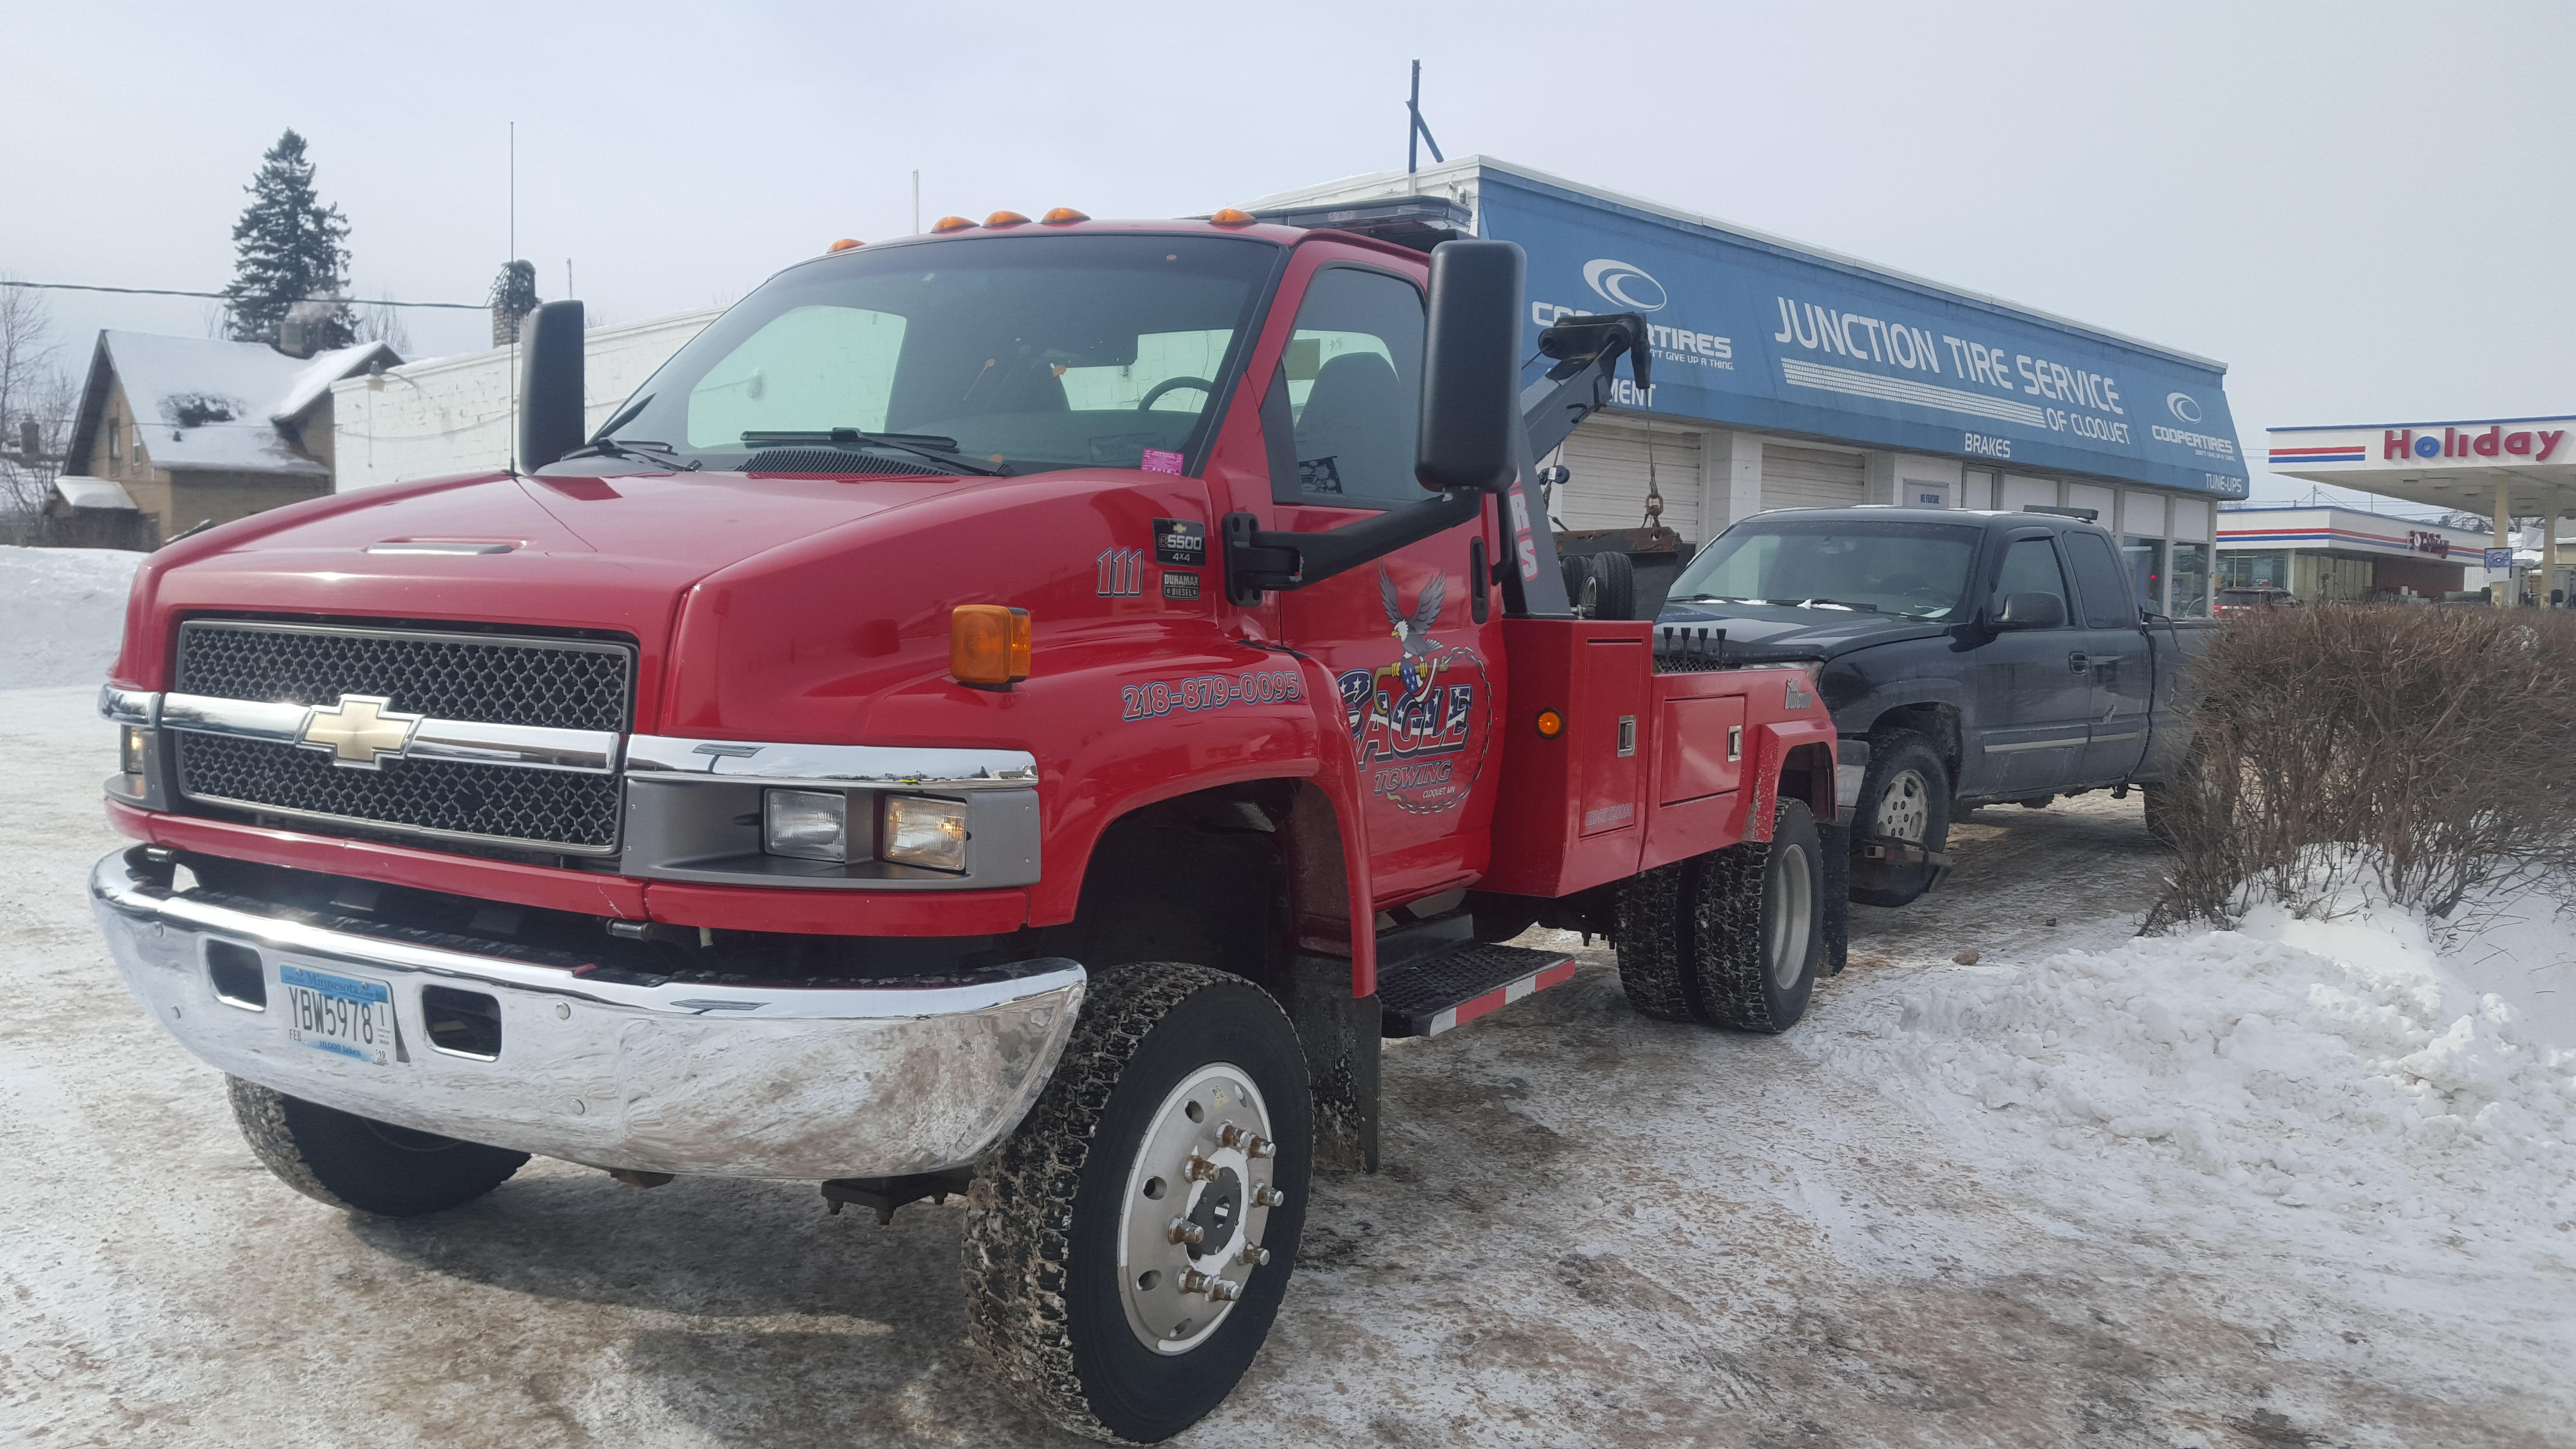 Eagle Towing | (218) 879-0095 | Cloquet, MN | 24 Hour Towing Service | Light Duty Towing | Medium Duty Towing | Heavy Duty Towing | Flatbed Towing | Box Truck Towing | School Bus Towing | Classic Car Towing | Dually Towing | Exotic Towing | Junk Car Removal | Limousine Towing | Winching & Extraction | Wrecker Towing | Luxury Car Towing | Accident Recovery | Equipment Transportation | Moving Forklifts | Scissor Lifts Movers | Boom Lifts Movers | Bull Dozers Movers | Excavators Movers | Compressors Movers | Loadshifts | Wide Loads Transportation | Exotic Car & Sport Car Towing | Long Distance Towing | Auto Transport | Tipsy Towing | Lockouts | Fuel Delivery | Jump Starts | Roadside Assistance | Motorcycle Towing | Tire Service | Private Property Impound (Non-Consensual Towing)